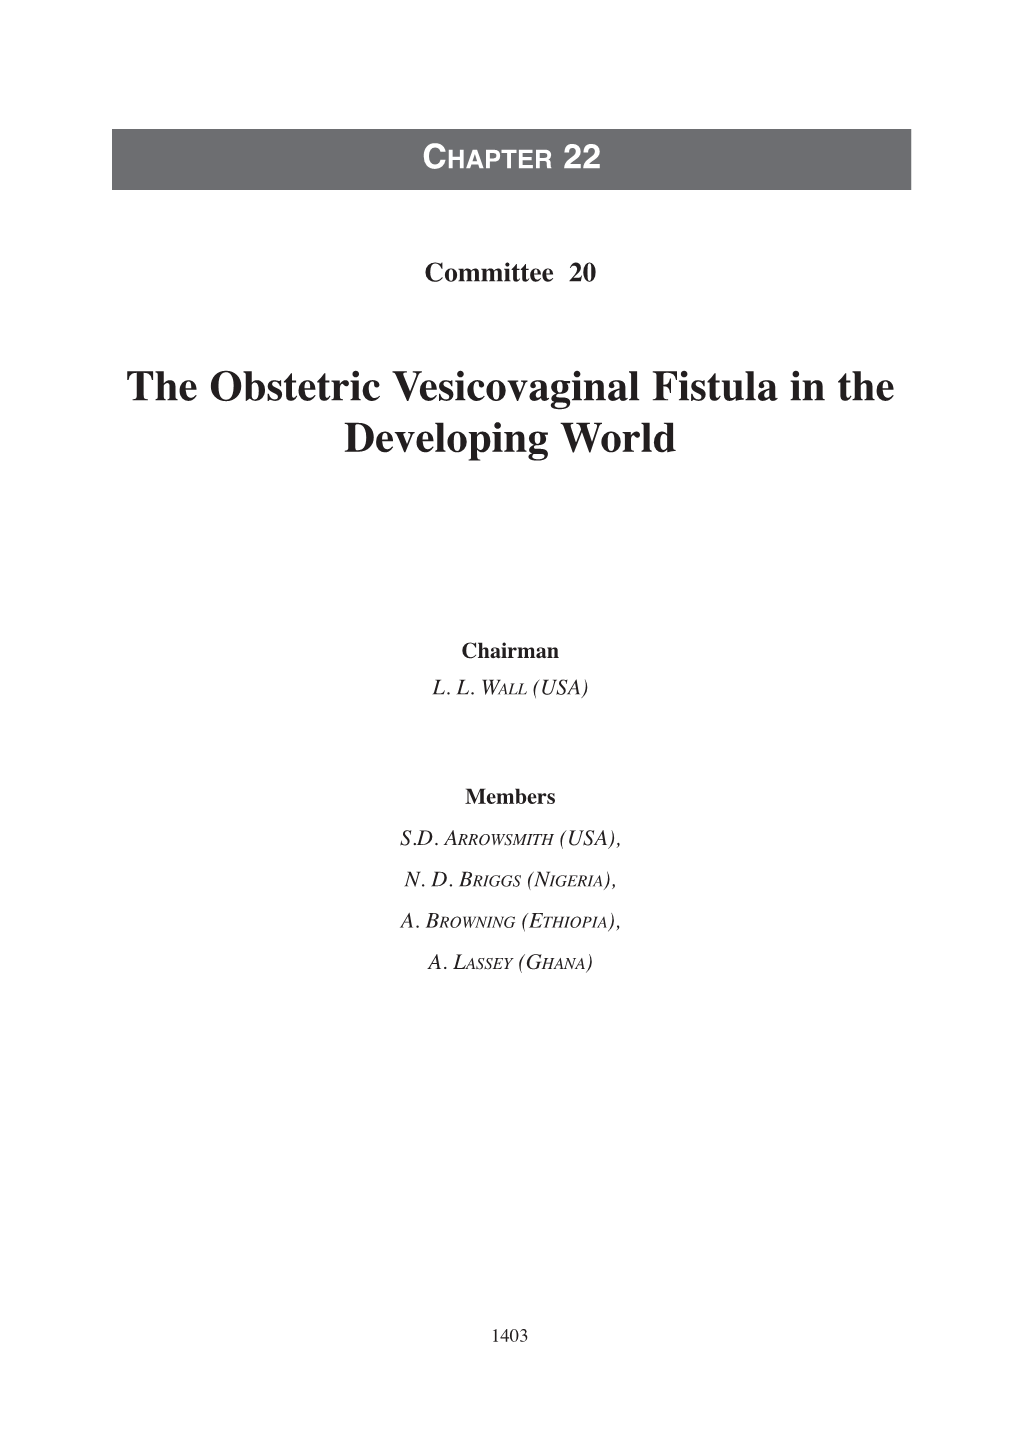 The Obstetric Vesicovaginal Fistula in the Developing World